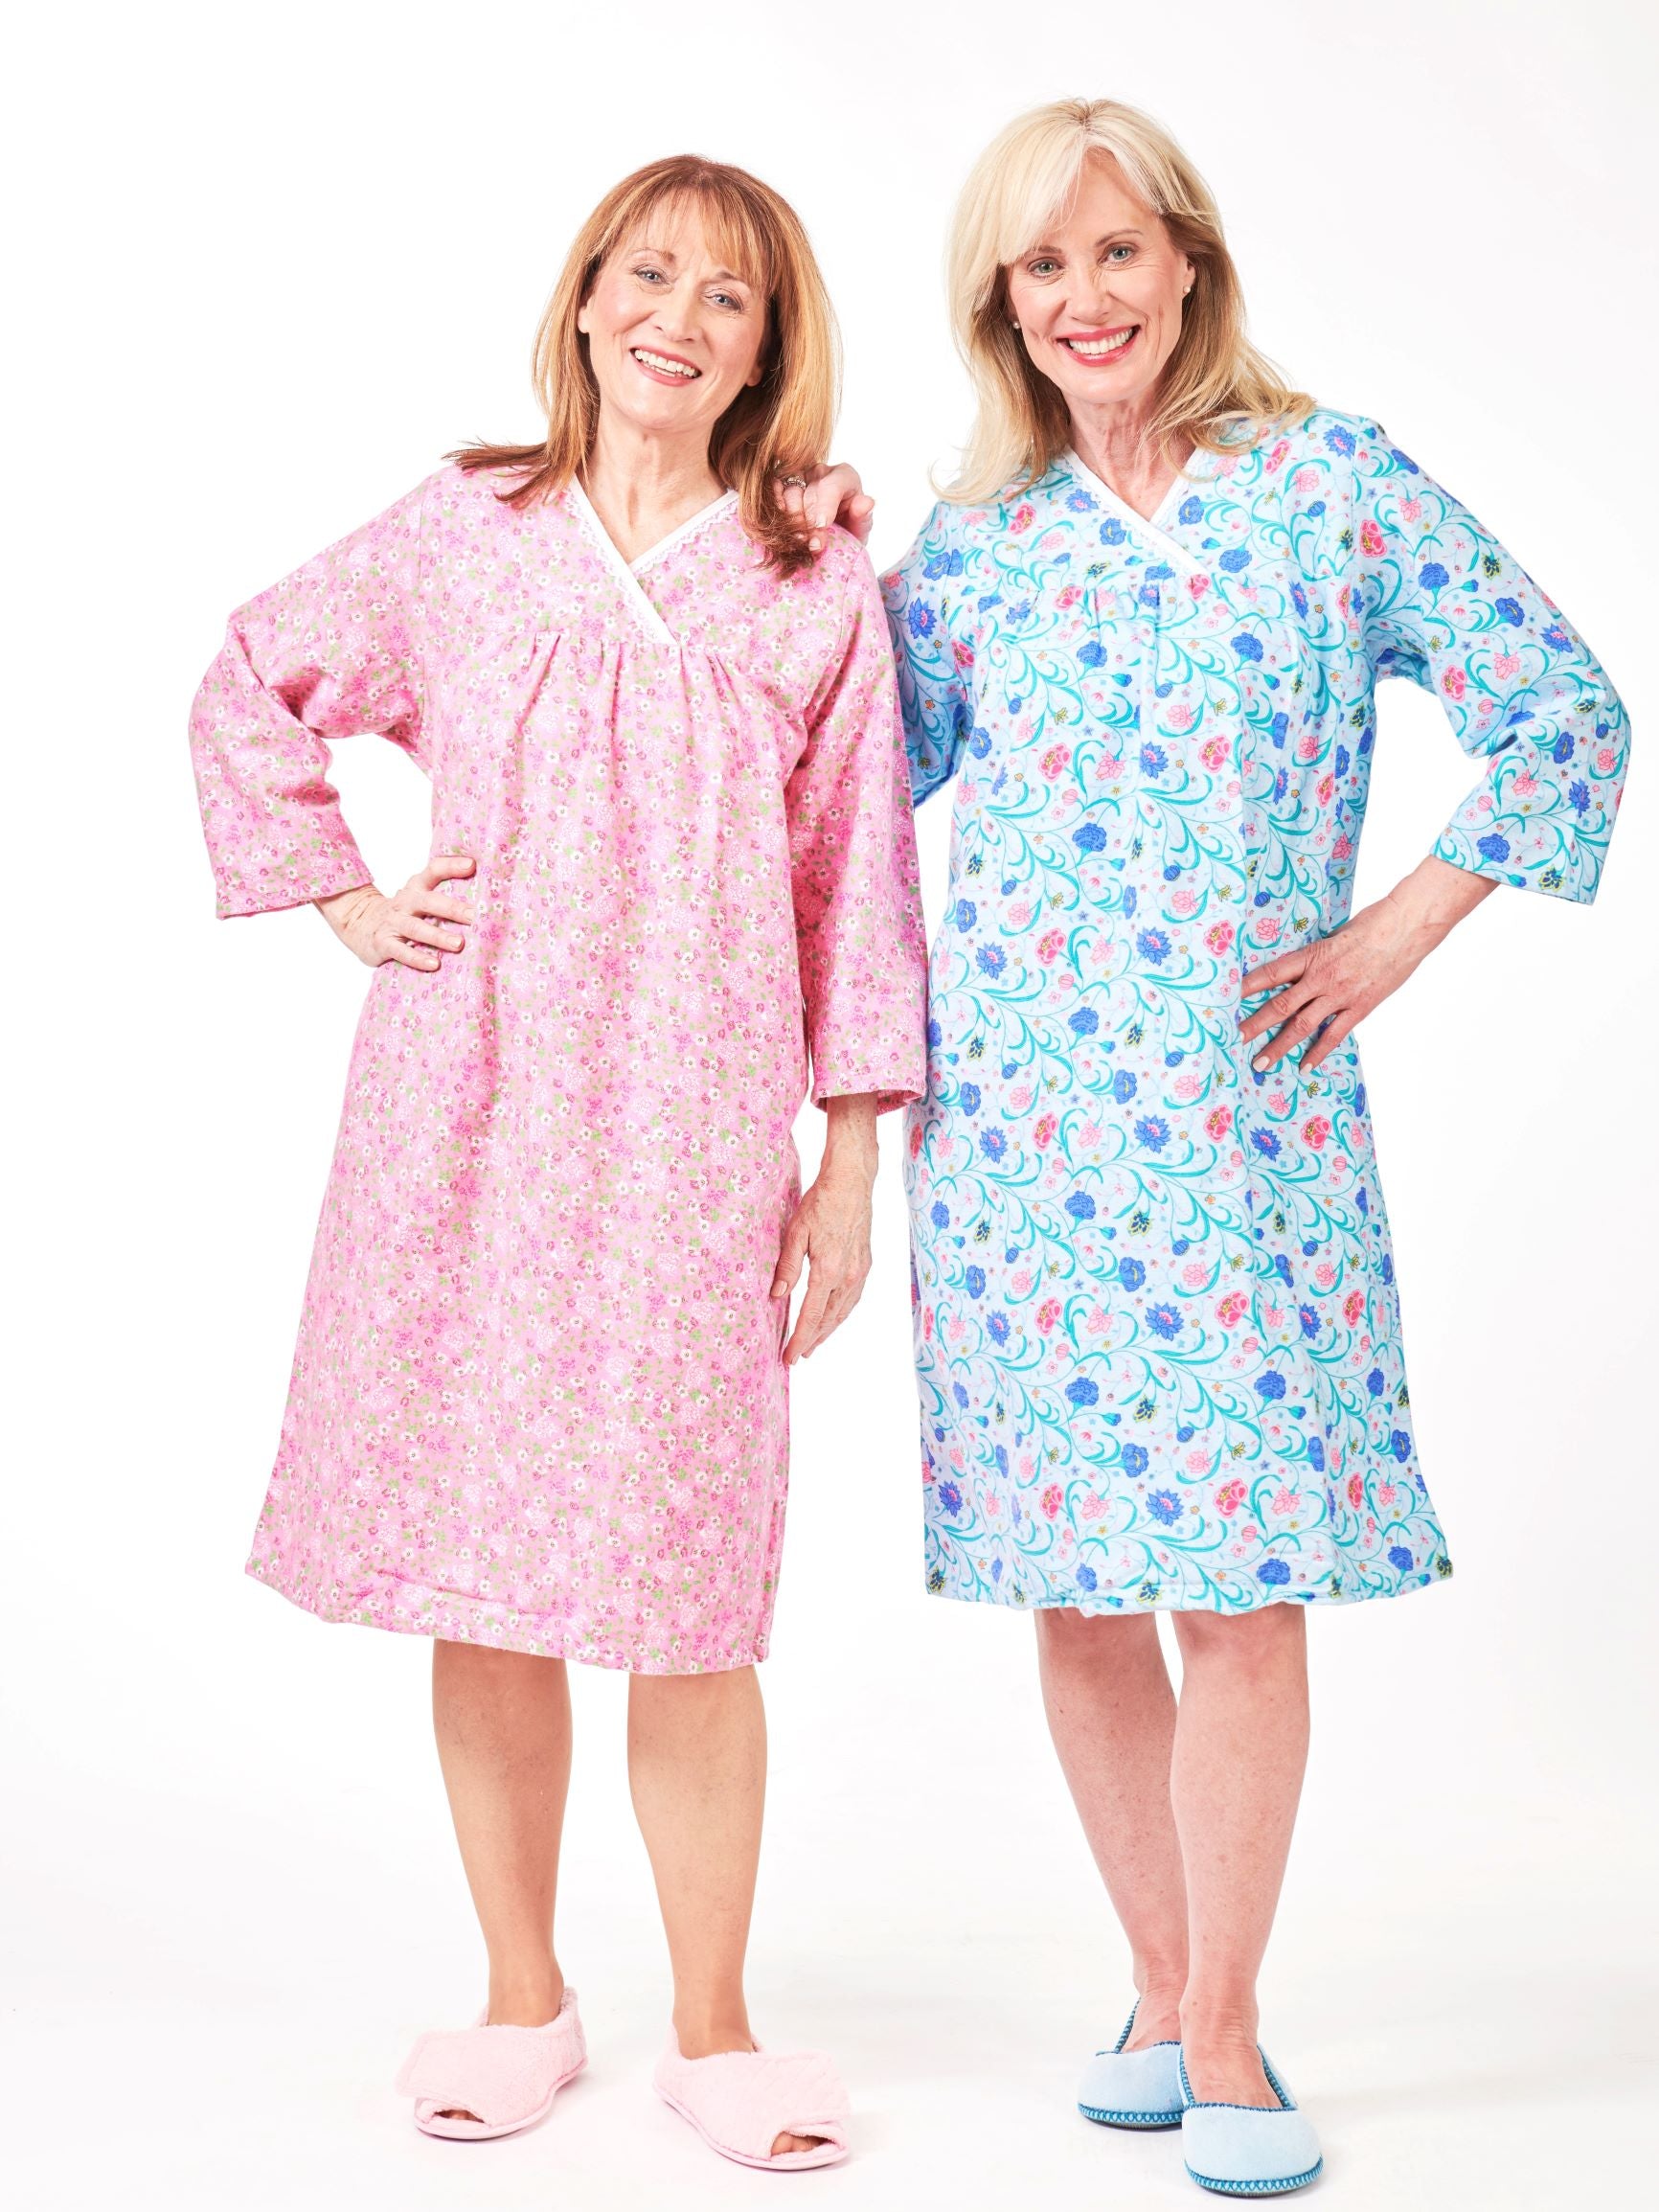 Flannel Nightgown